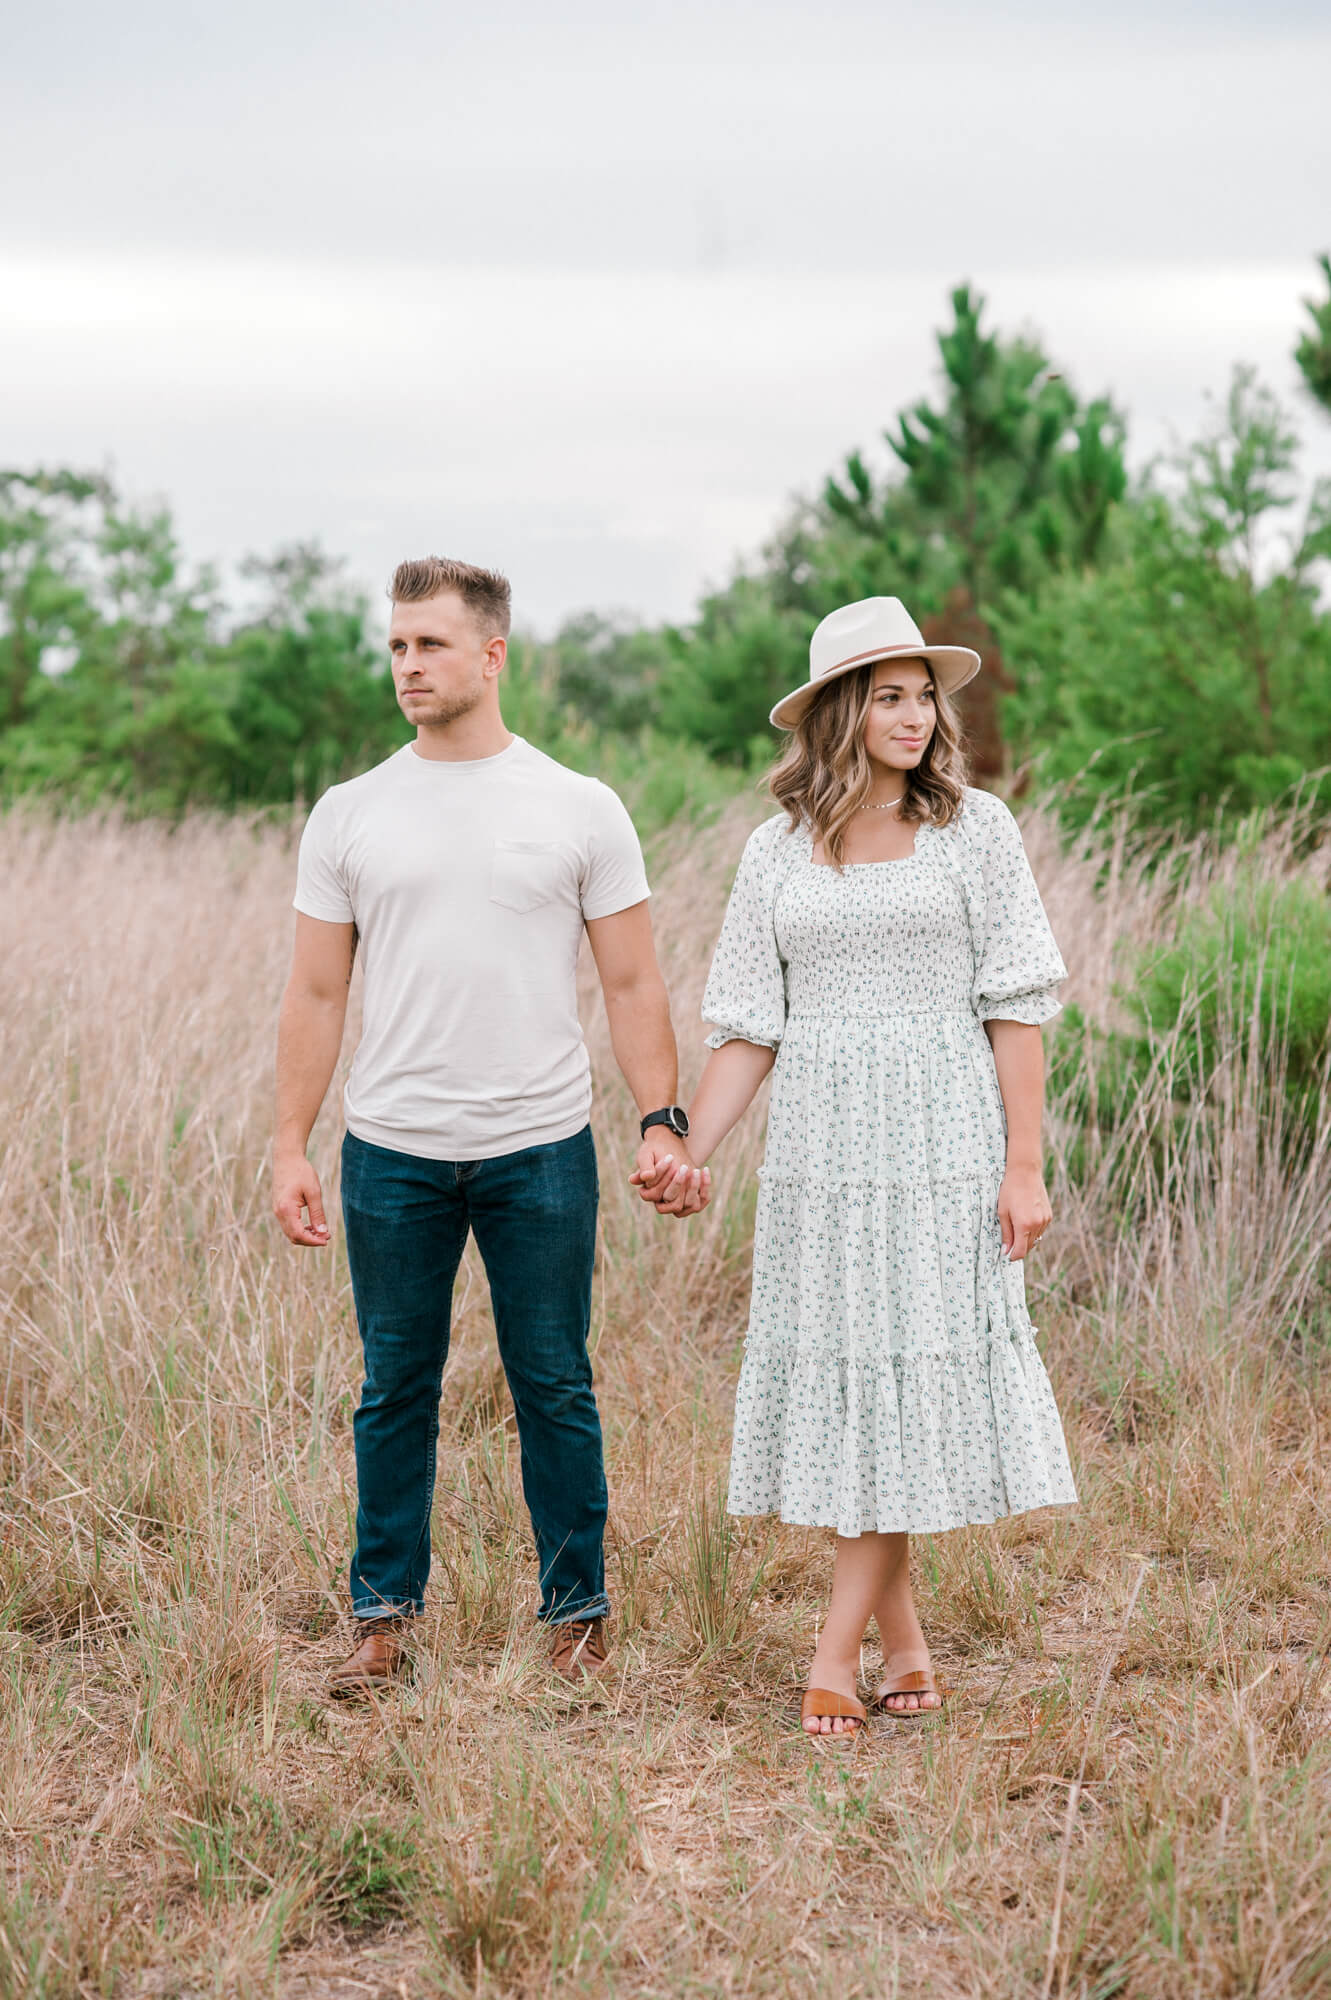 Husband + Wife standing in a field looking in separate directions while holding hands. 